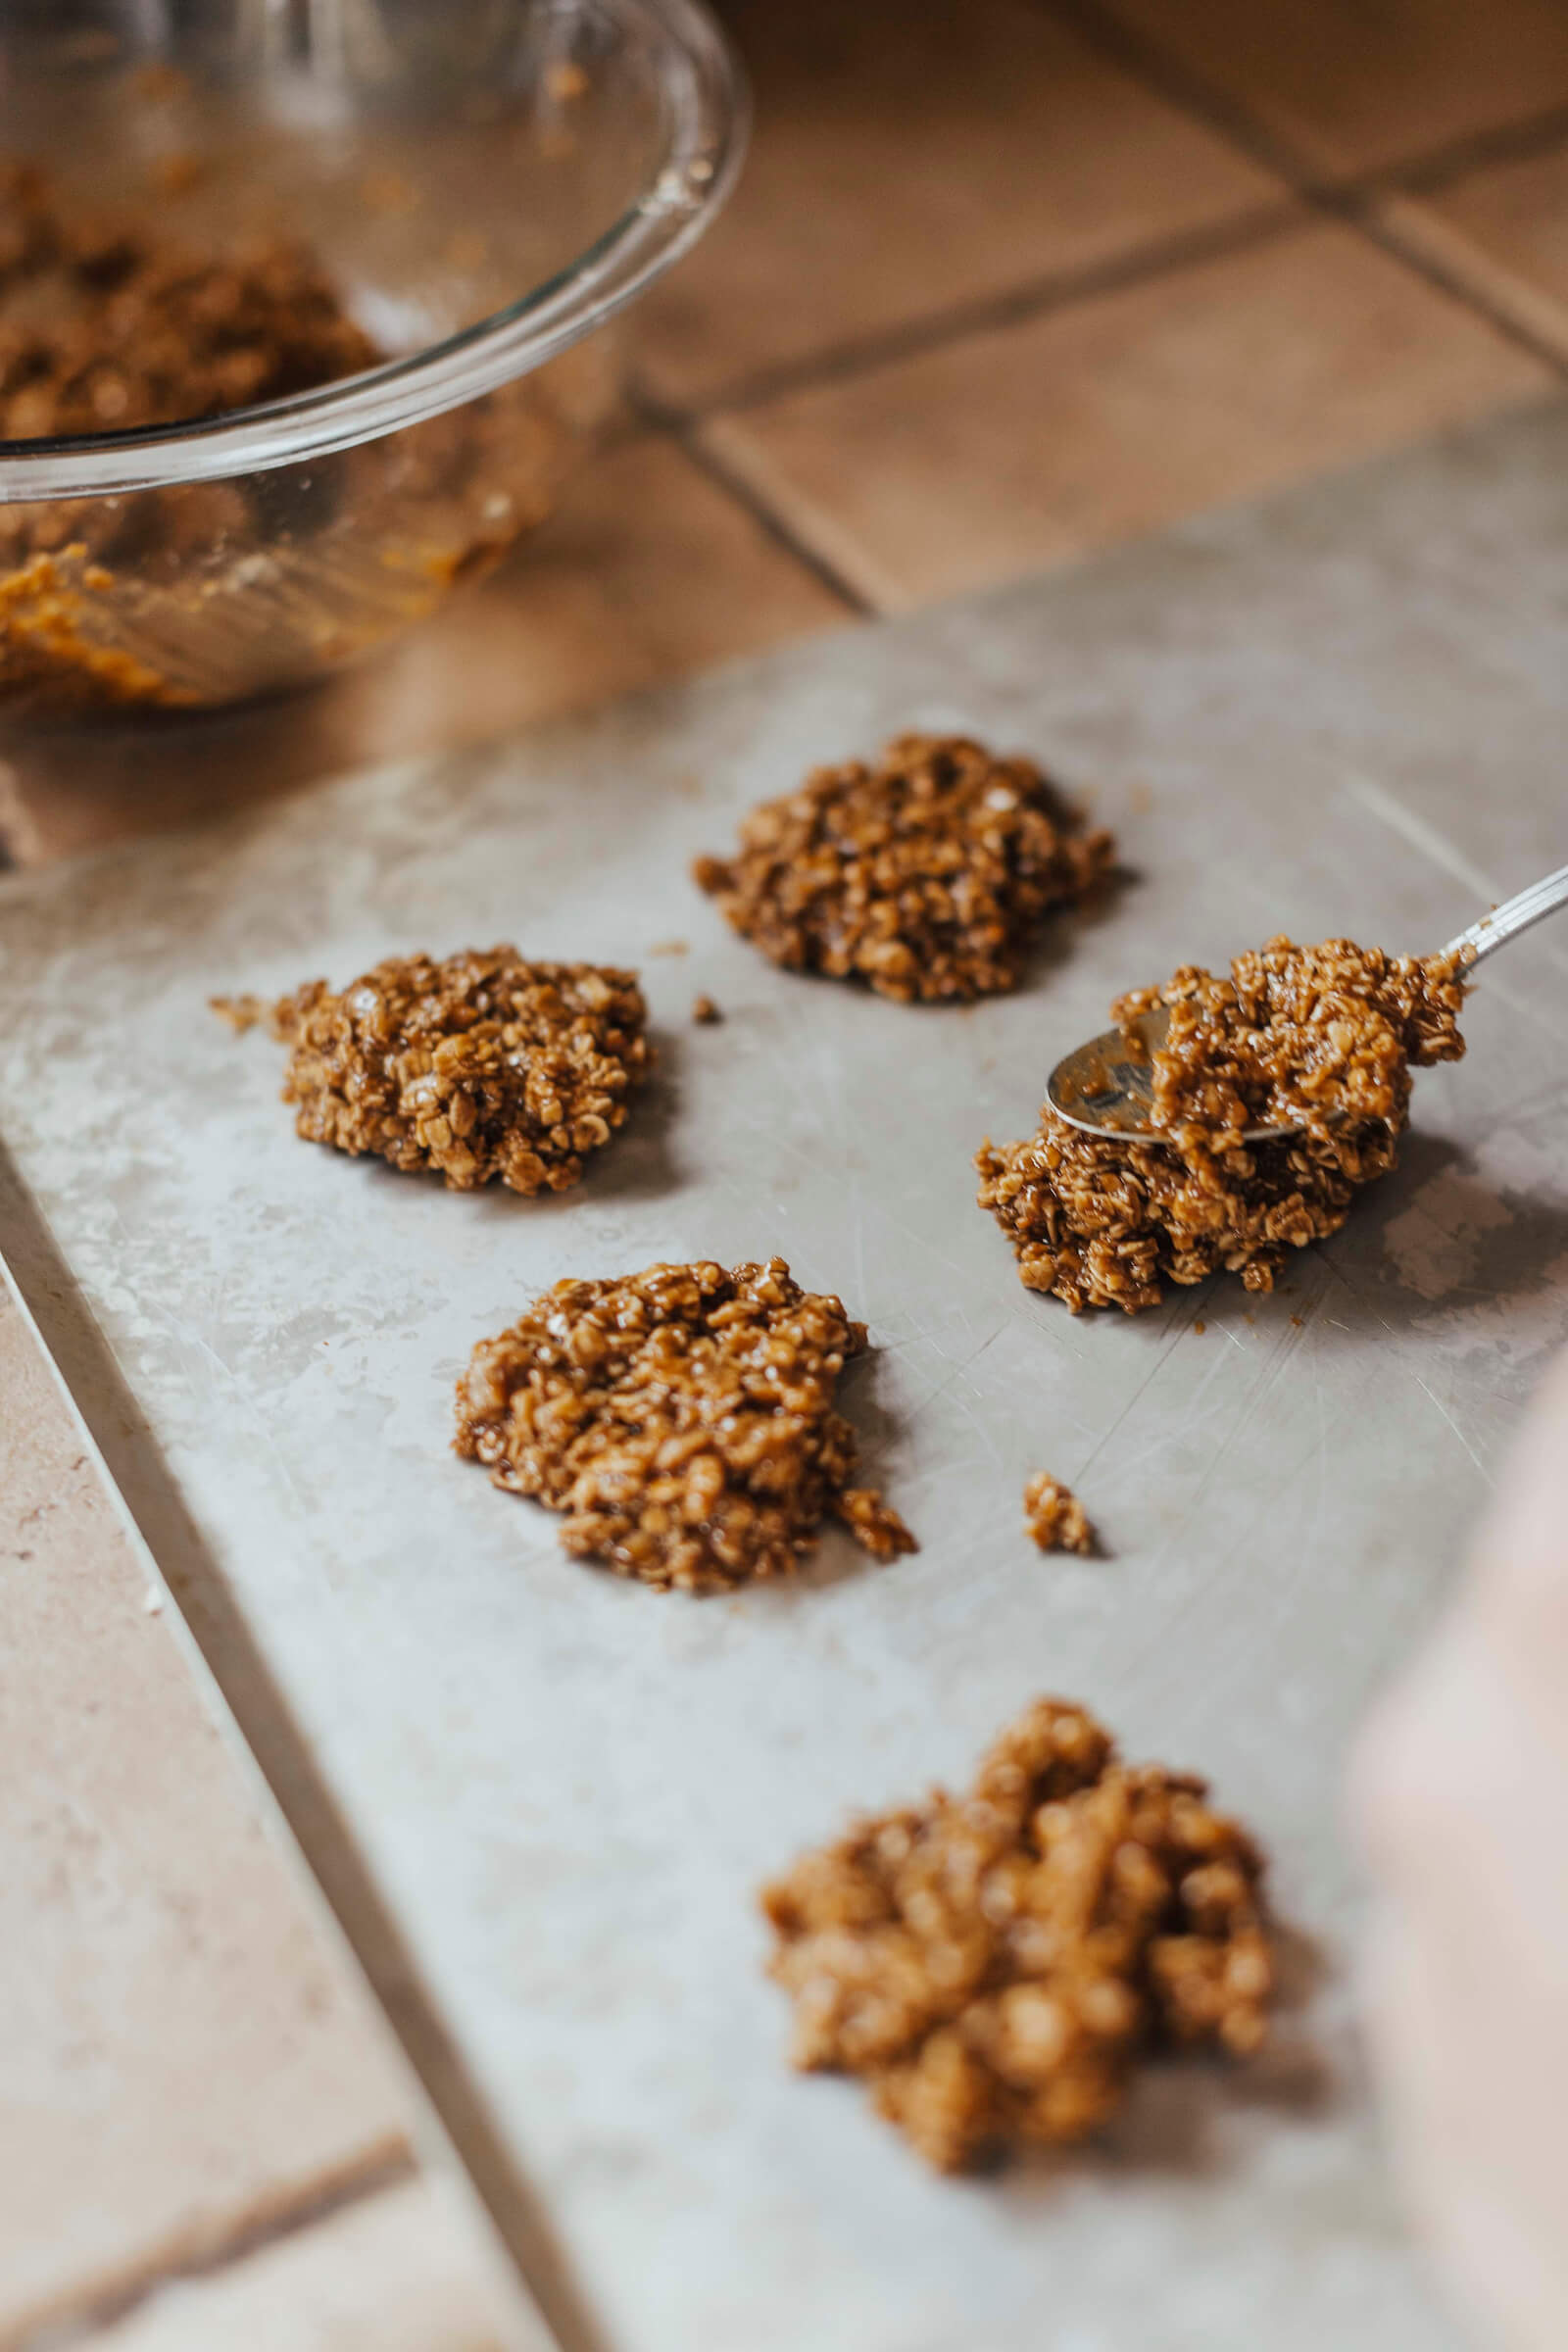 Hallie perfects a no-bake cookie recipe